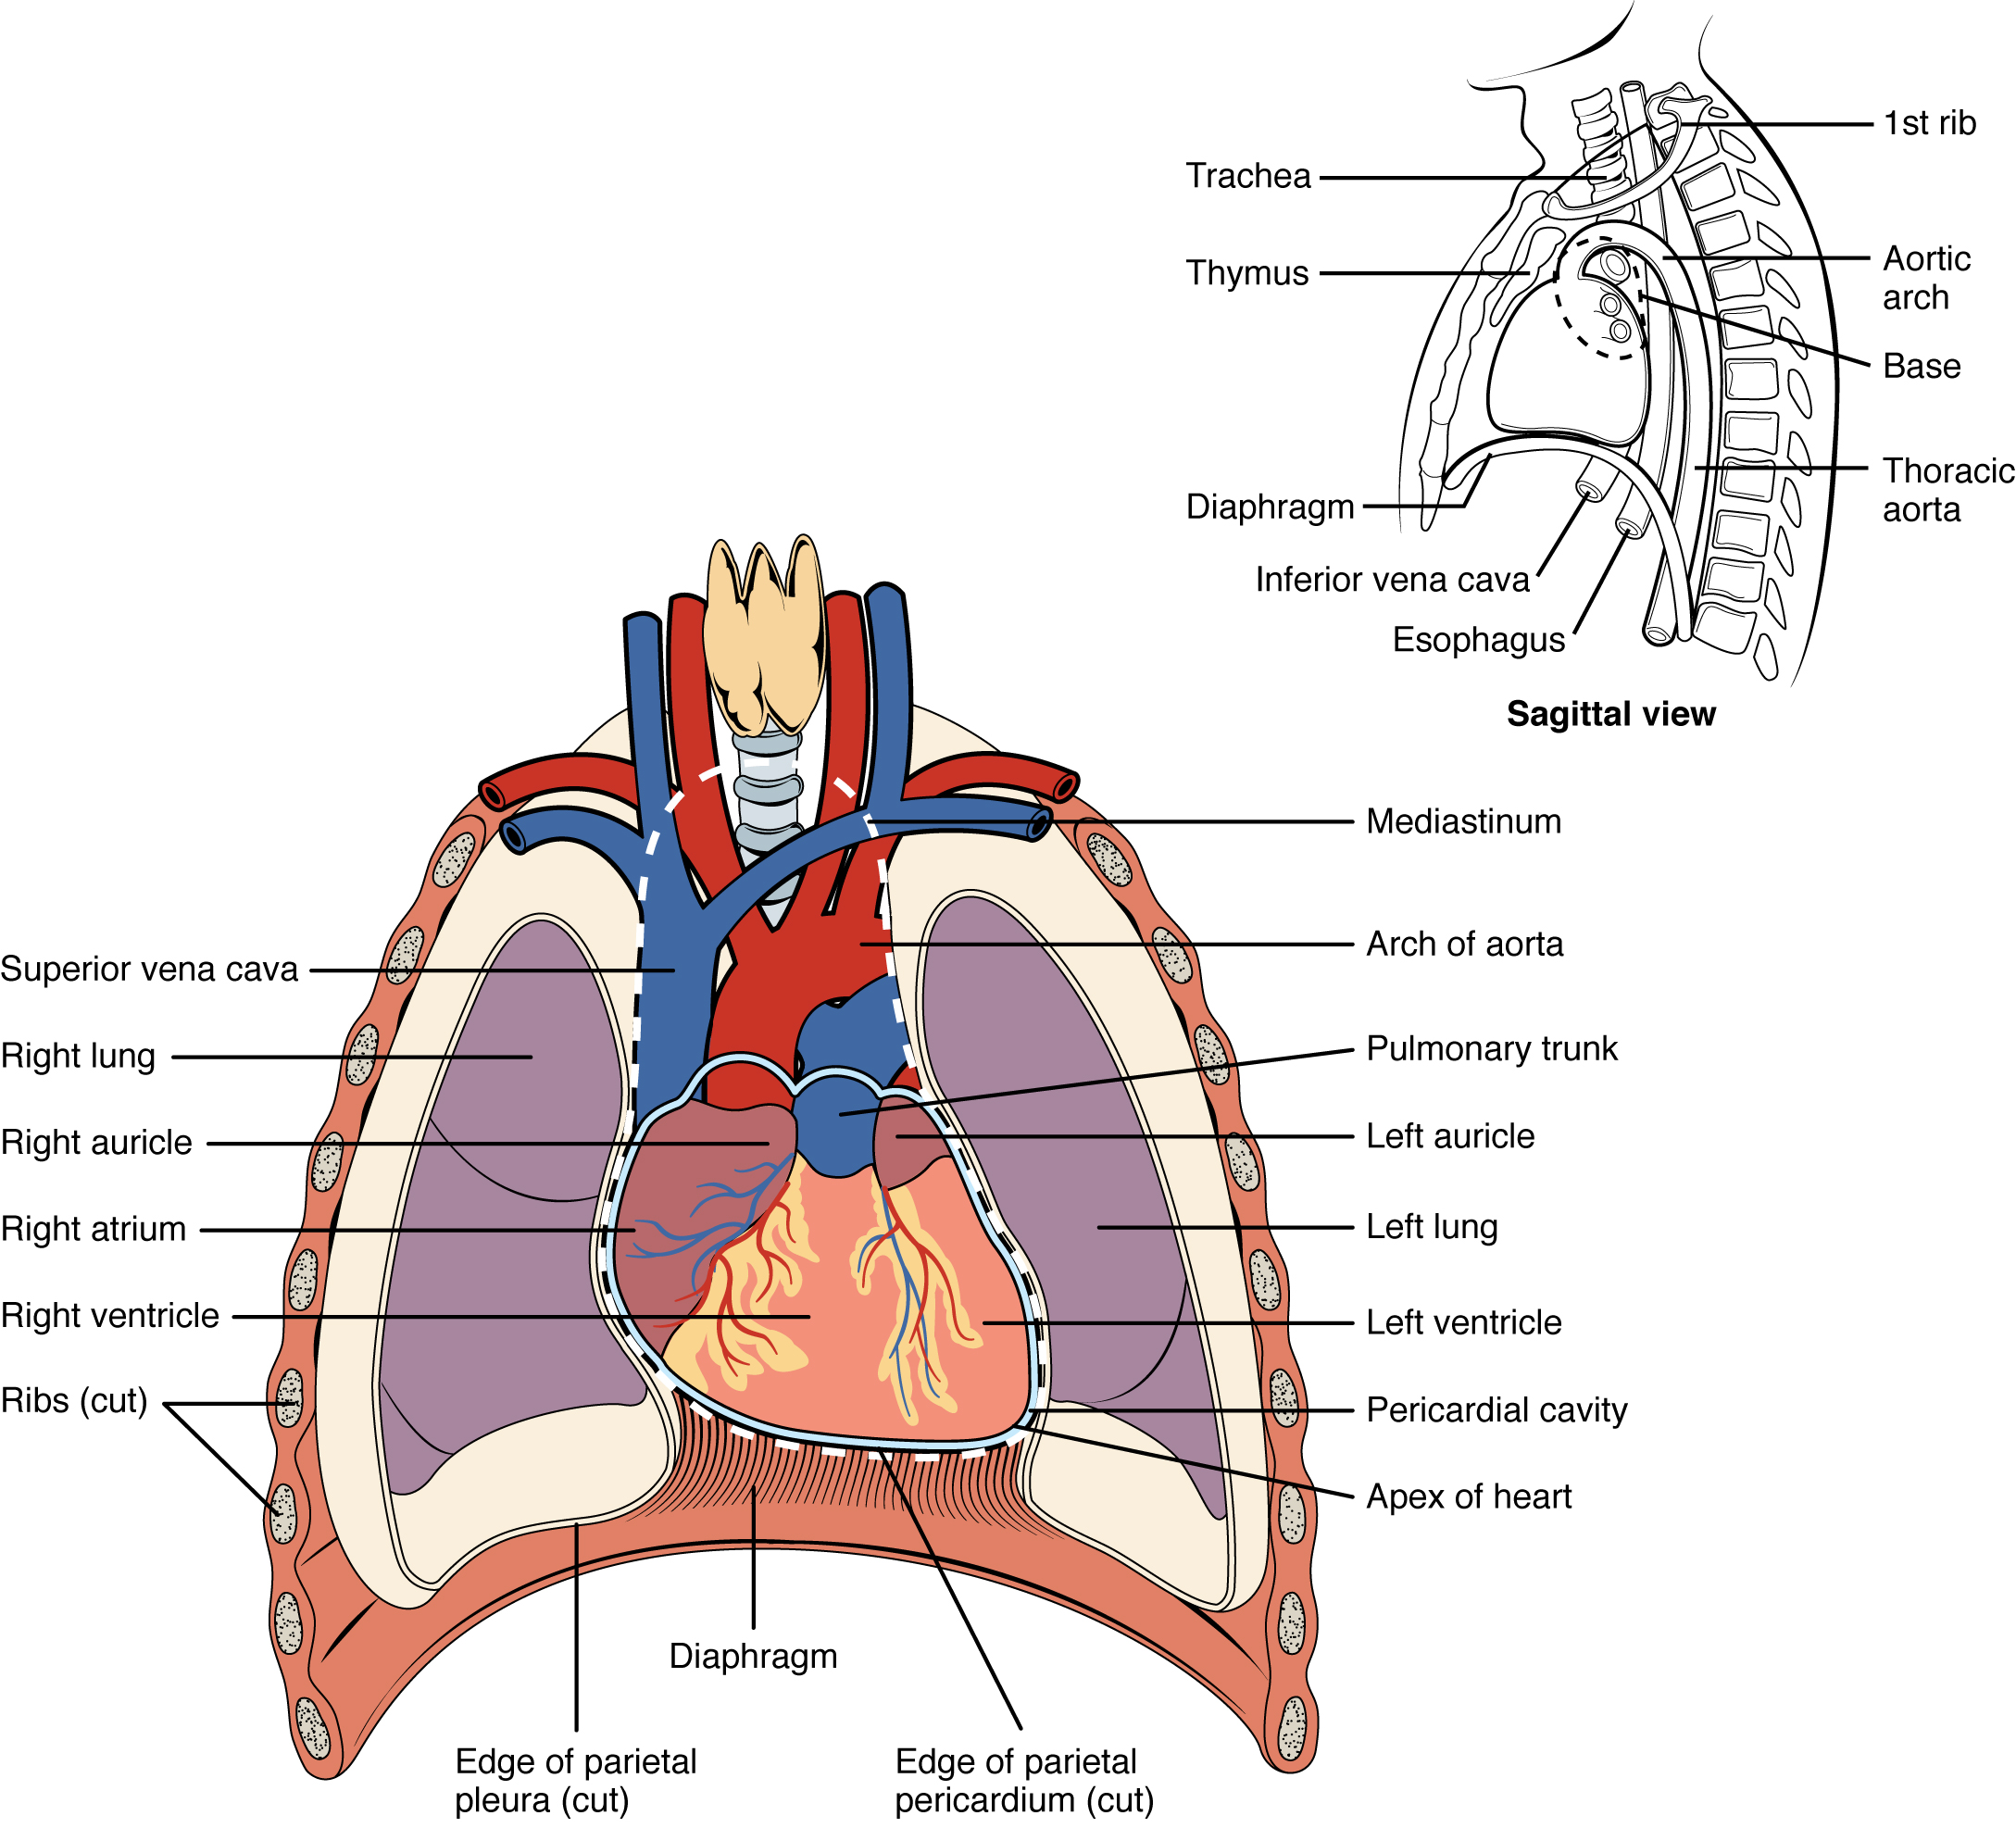 Illustration, with labels, showing position of the heart in the thoracic cavity.